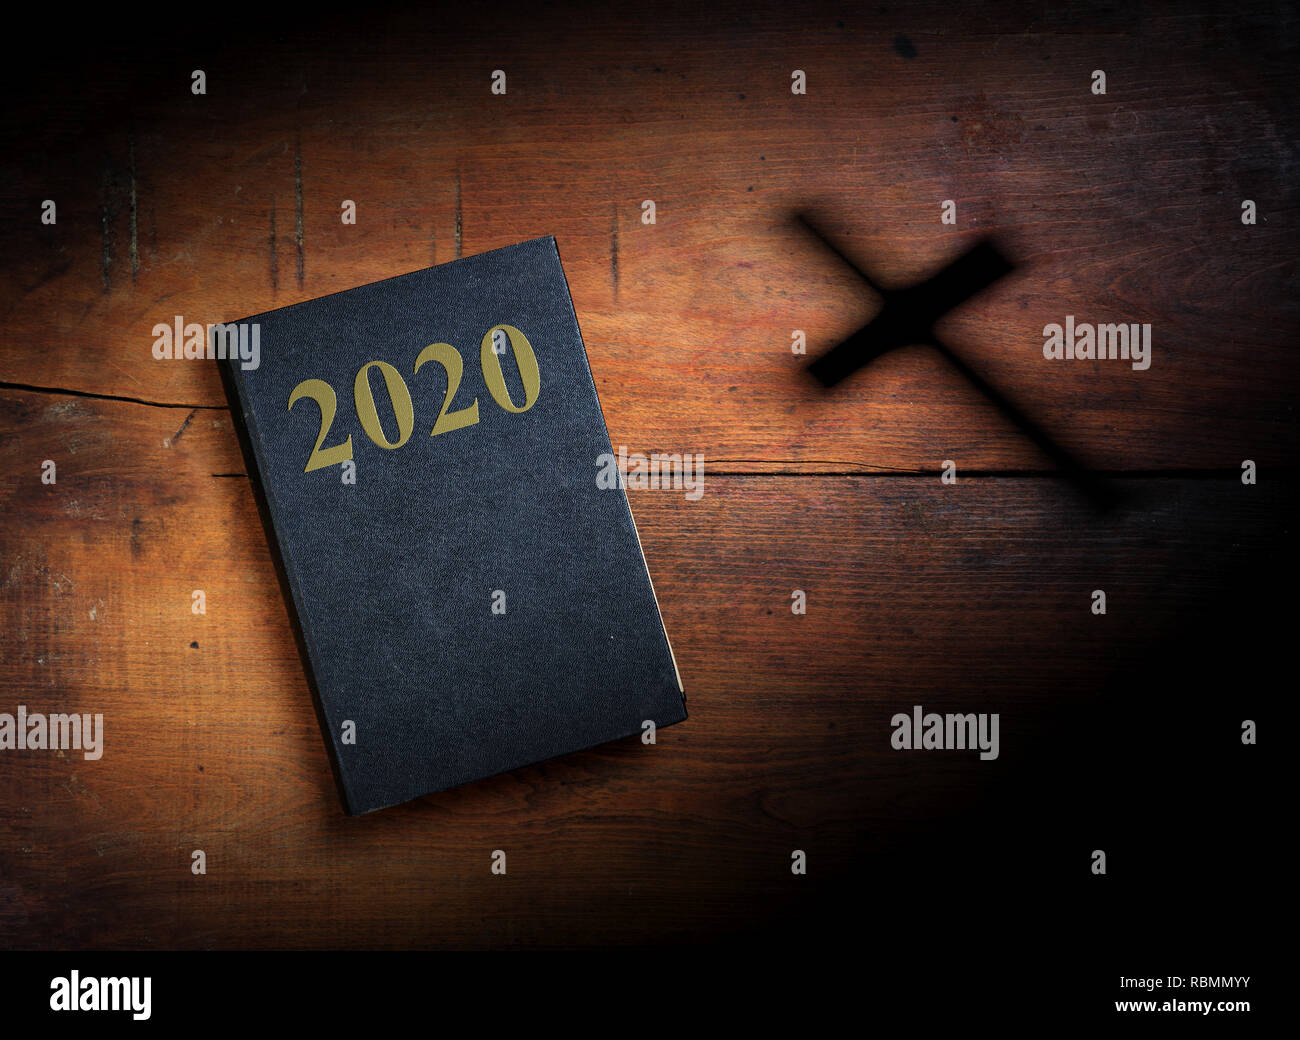 2020 New year and christianity. Holy Bible with 2020 text and cross on wooden background. 3d illustration Stock Photo